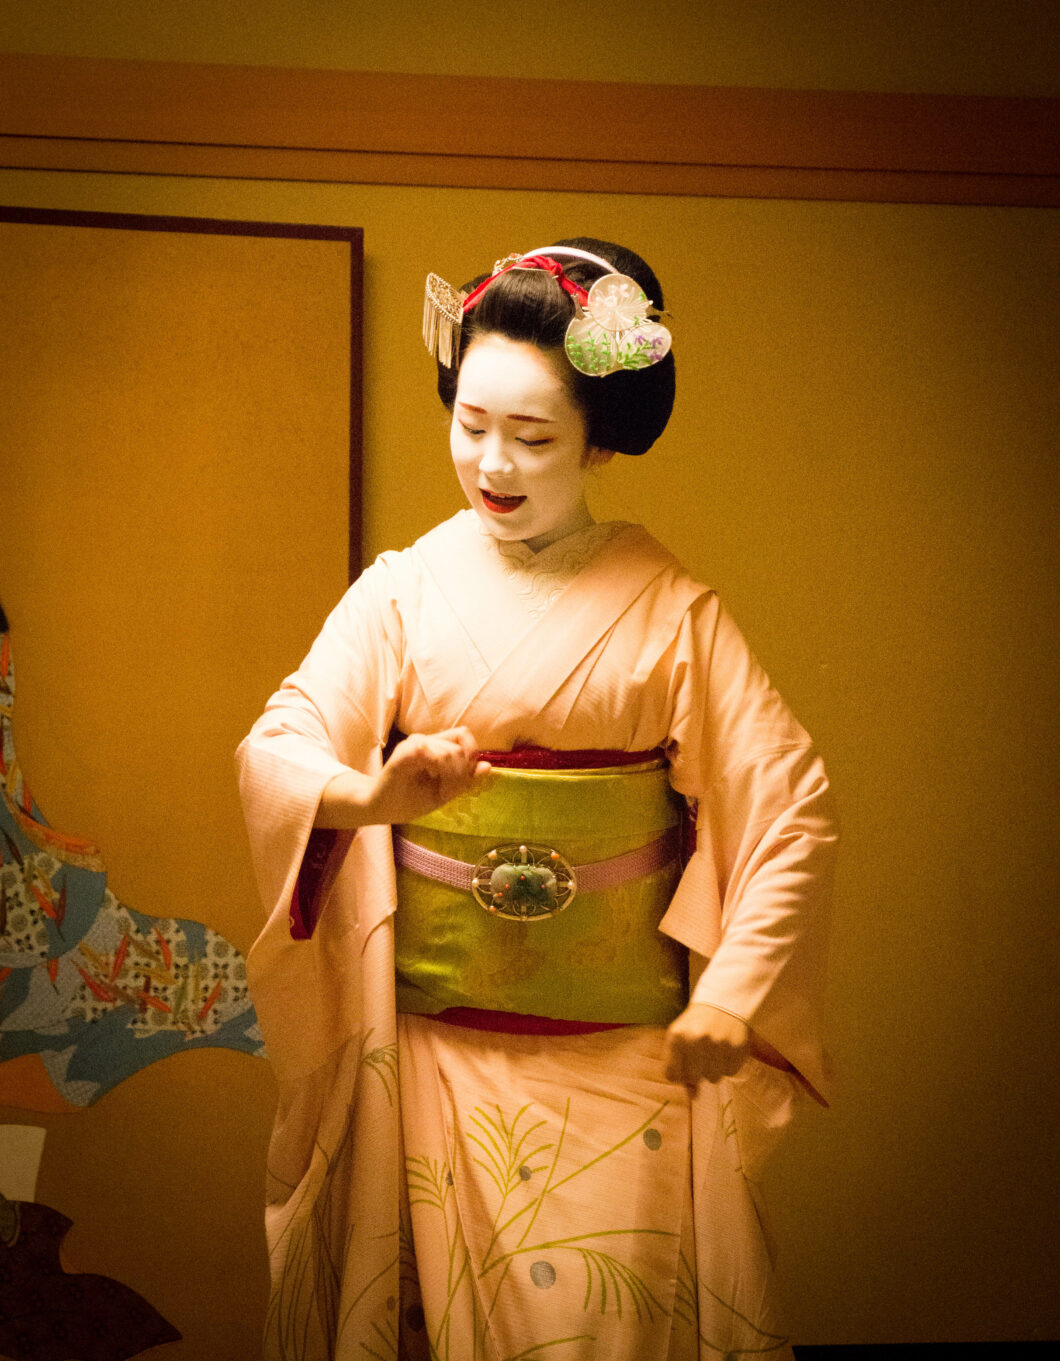 A Japanese Maiko dances to music during an evening dinner performance. She is wearing traditional Geisha clothing including a kimono and obi sash.